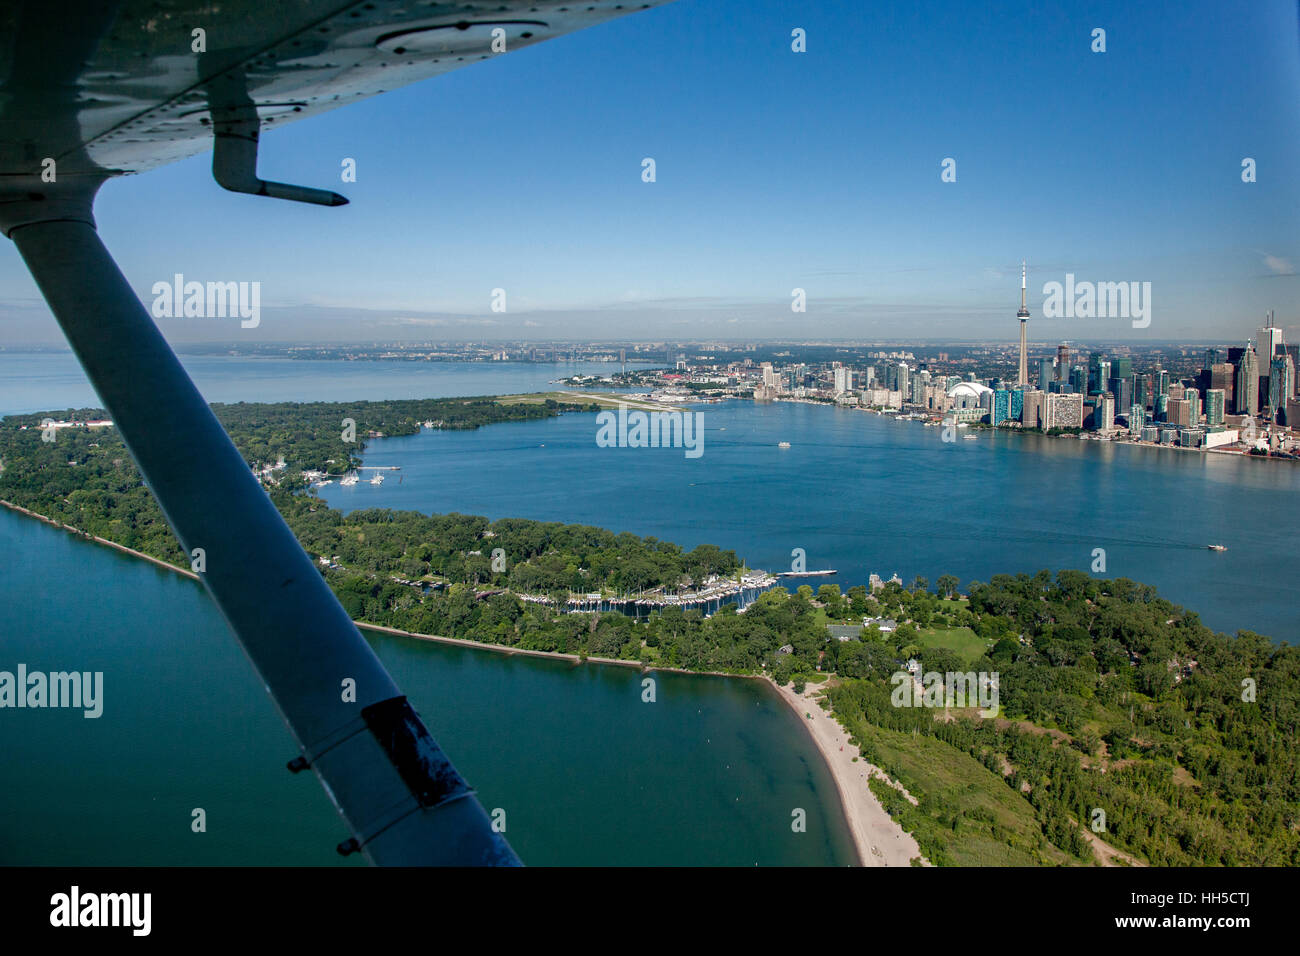 An Aerial view of Toronto City Centre with the islands forming the harbour. Stock Photo